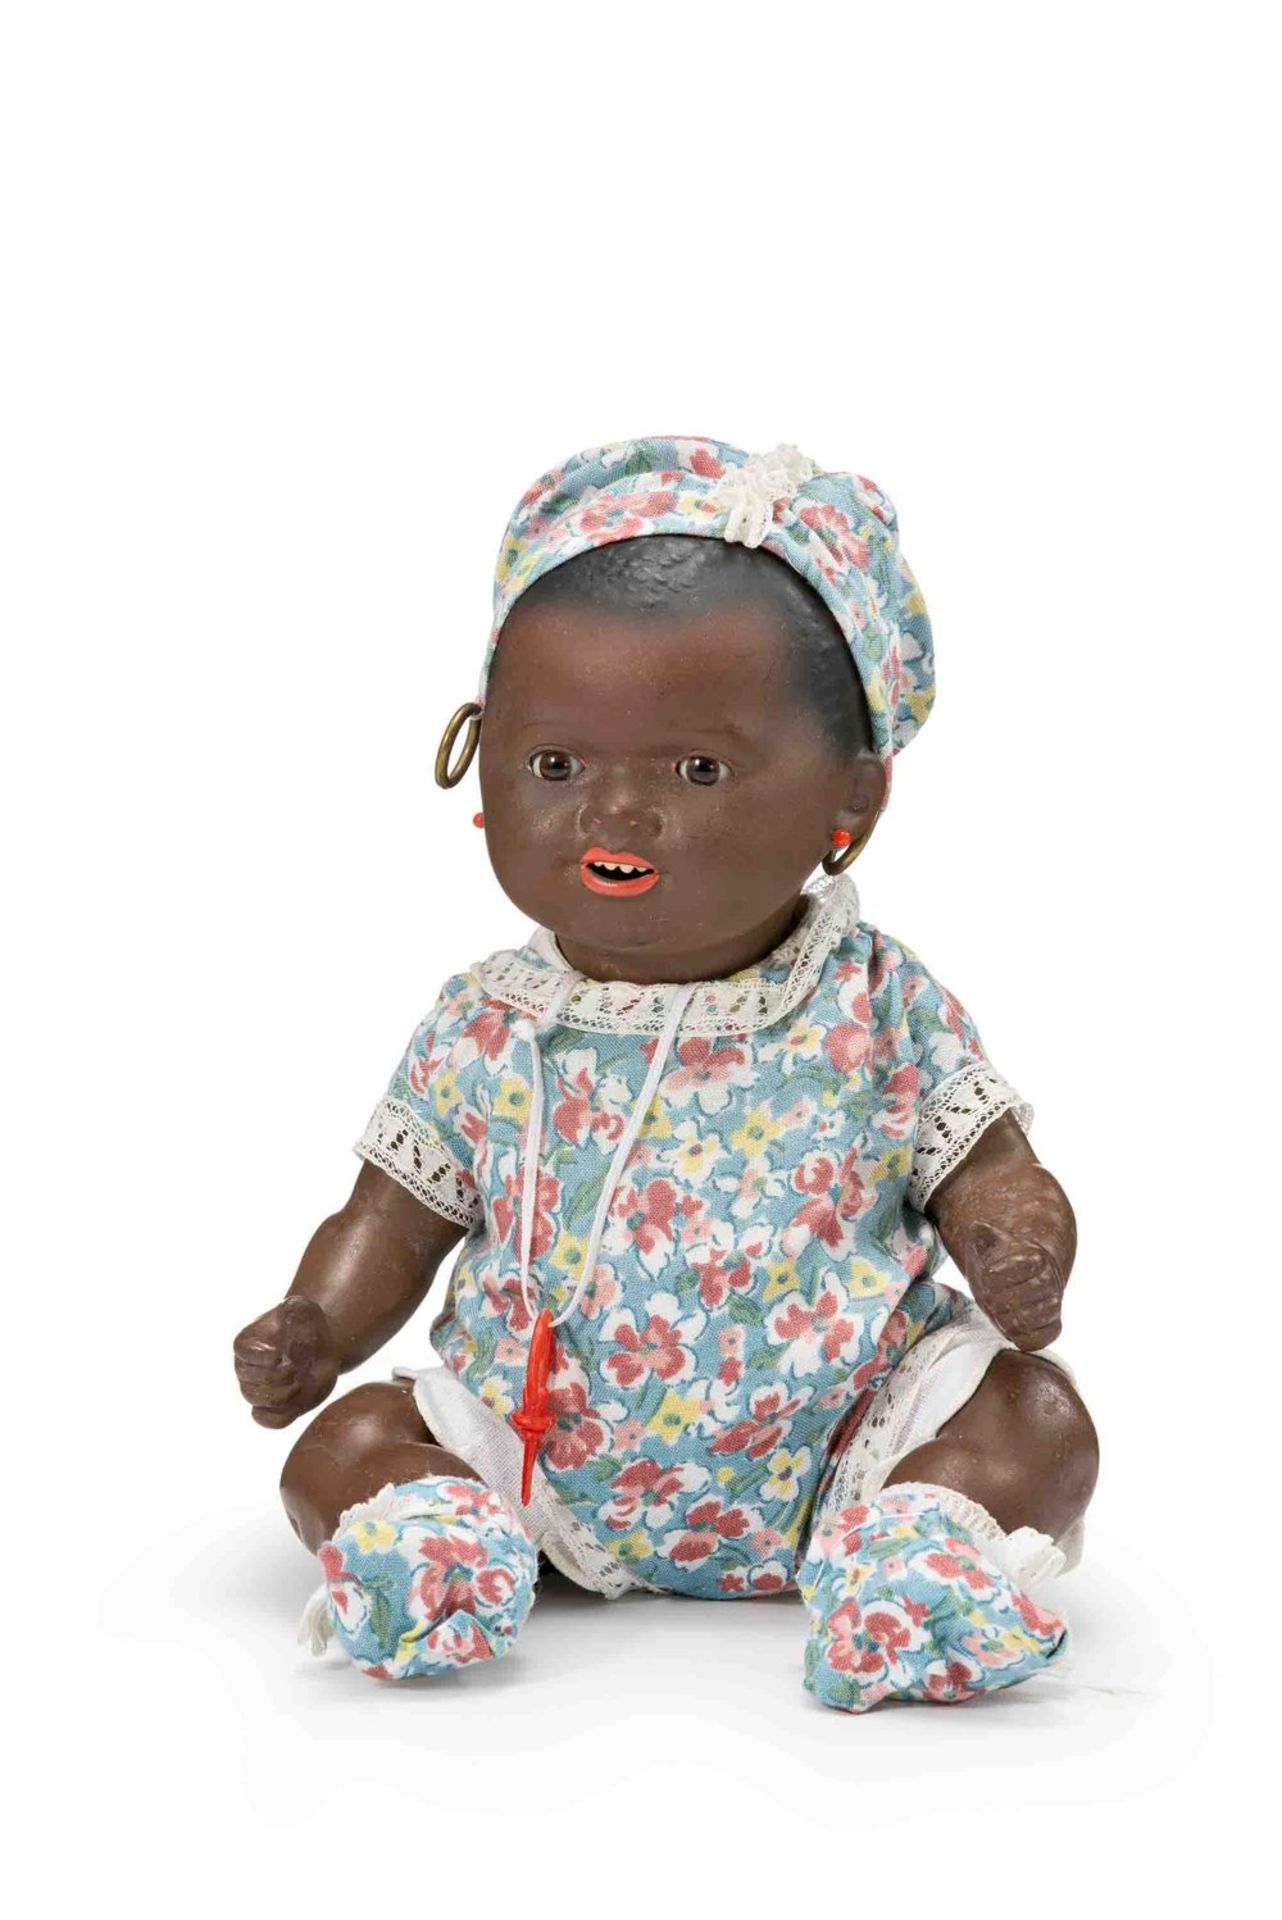 Neger-Charakterbaby